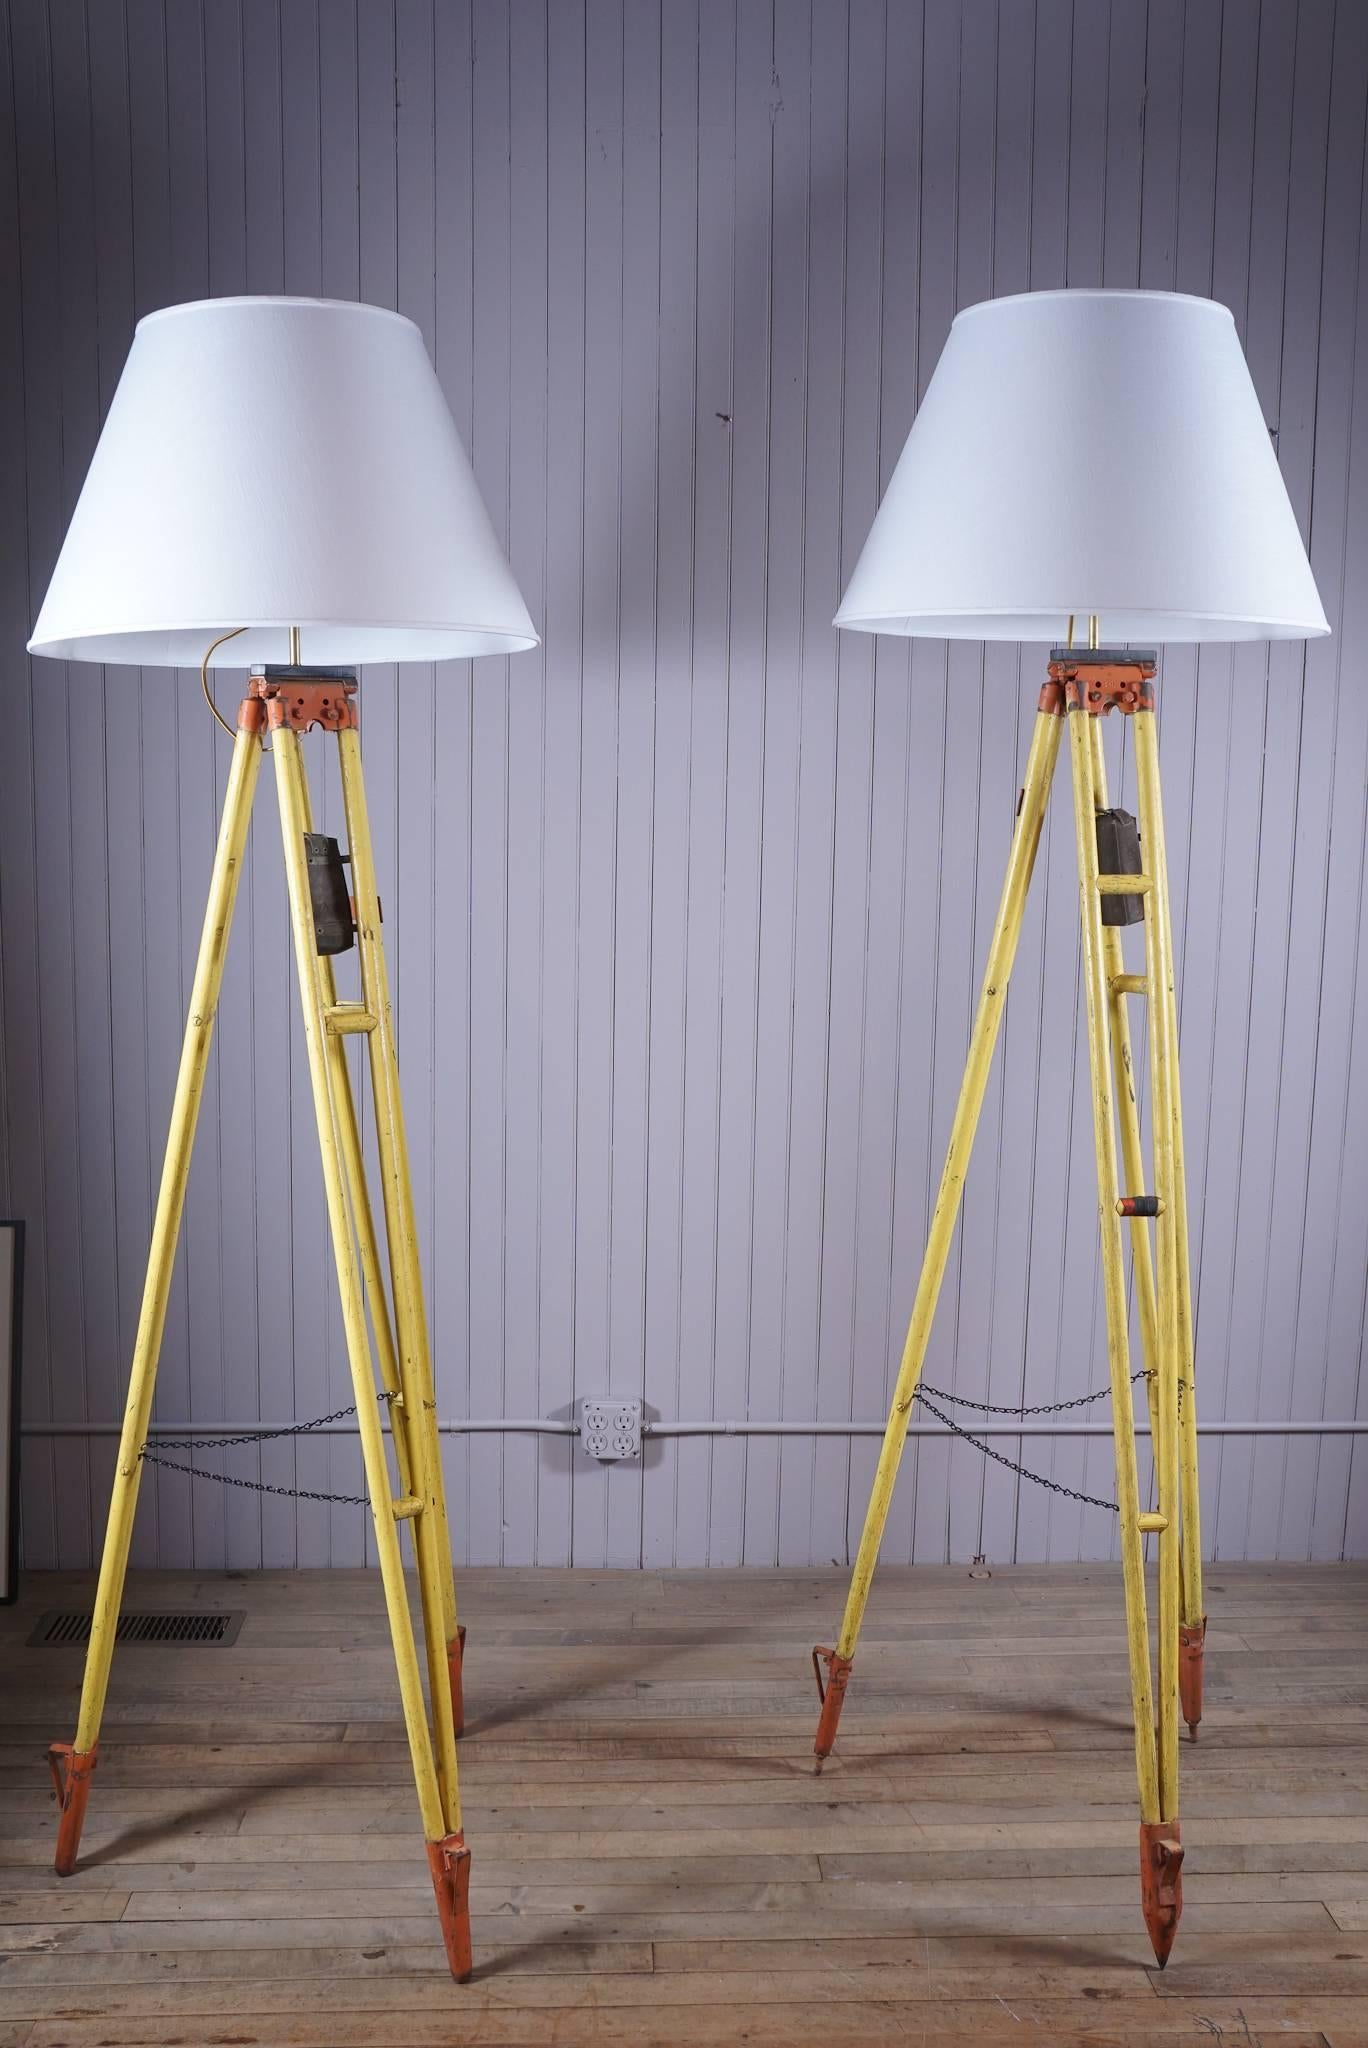 Pair of surveyors stands altered into floor lamps chrome yellow painted wood orange painted metal attachments cloth box.